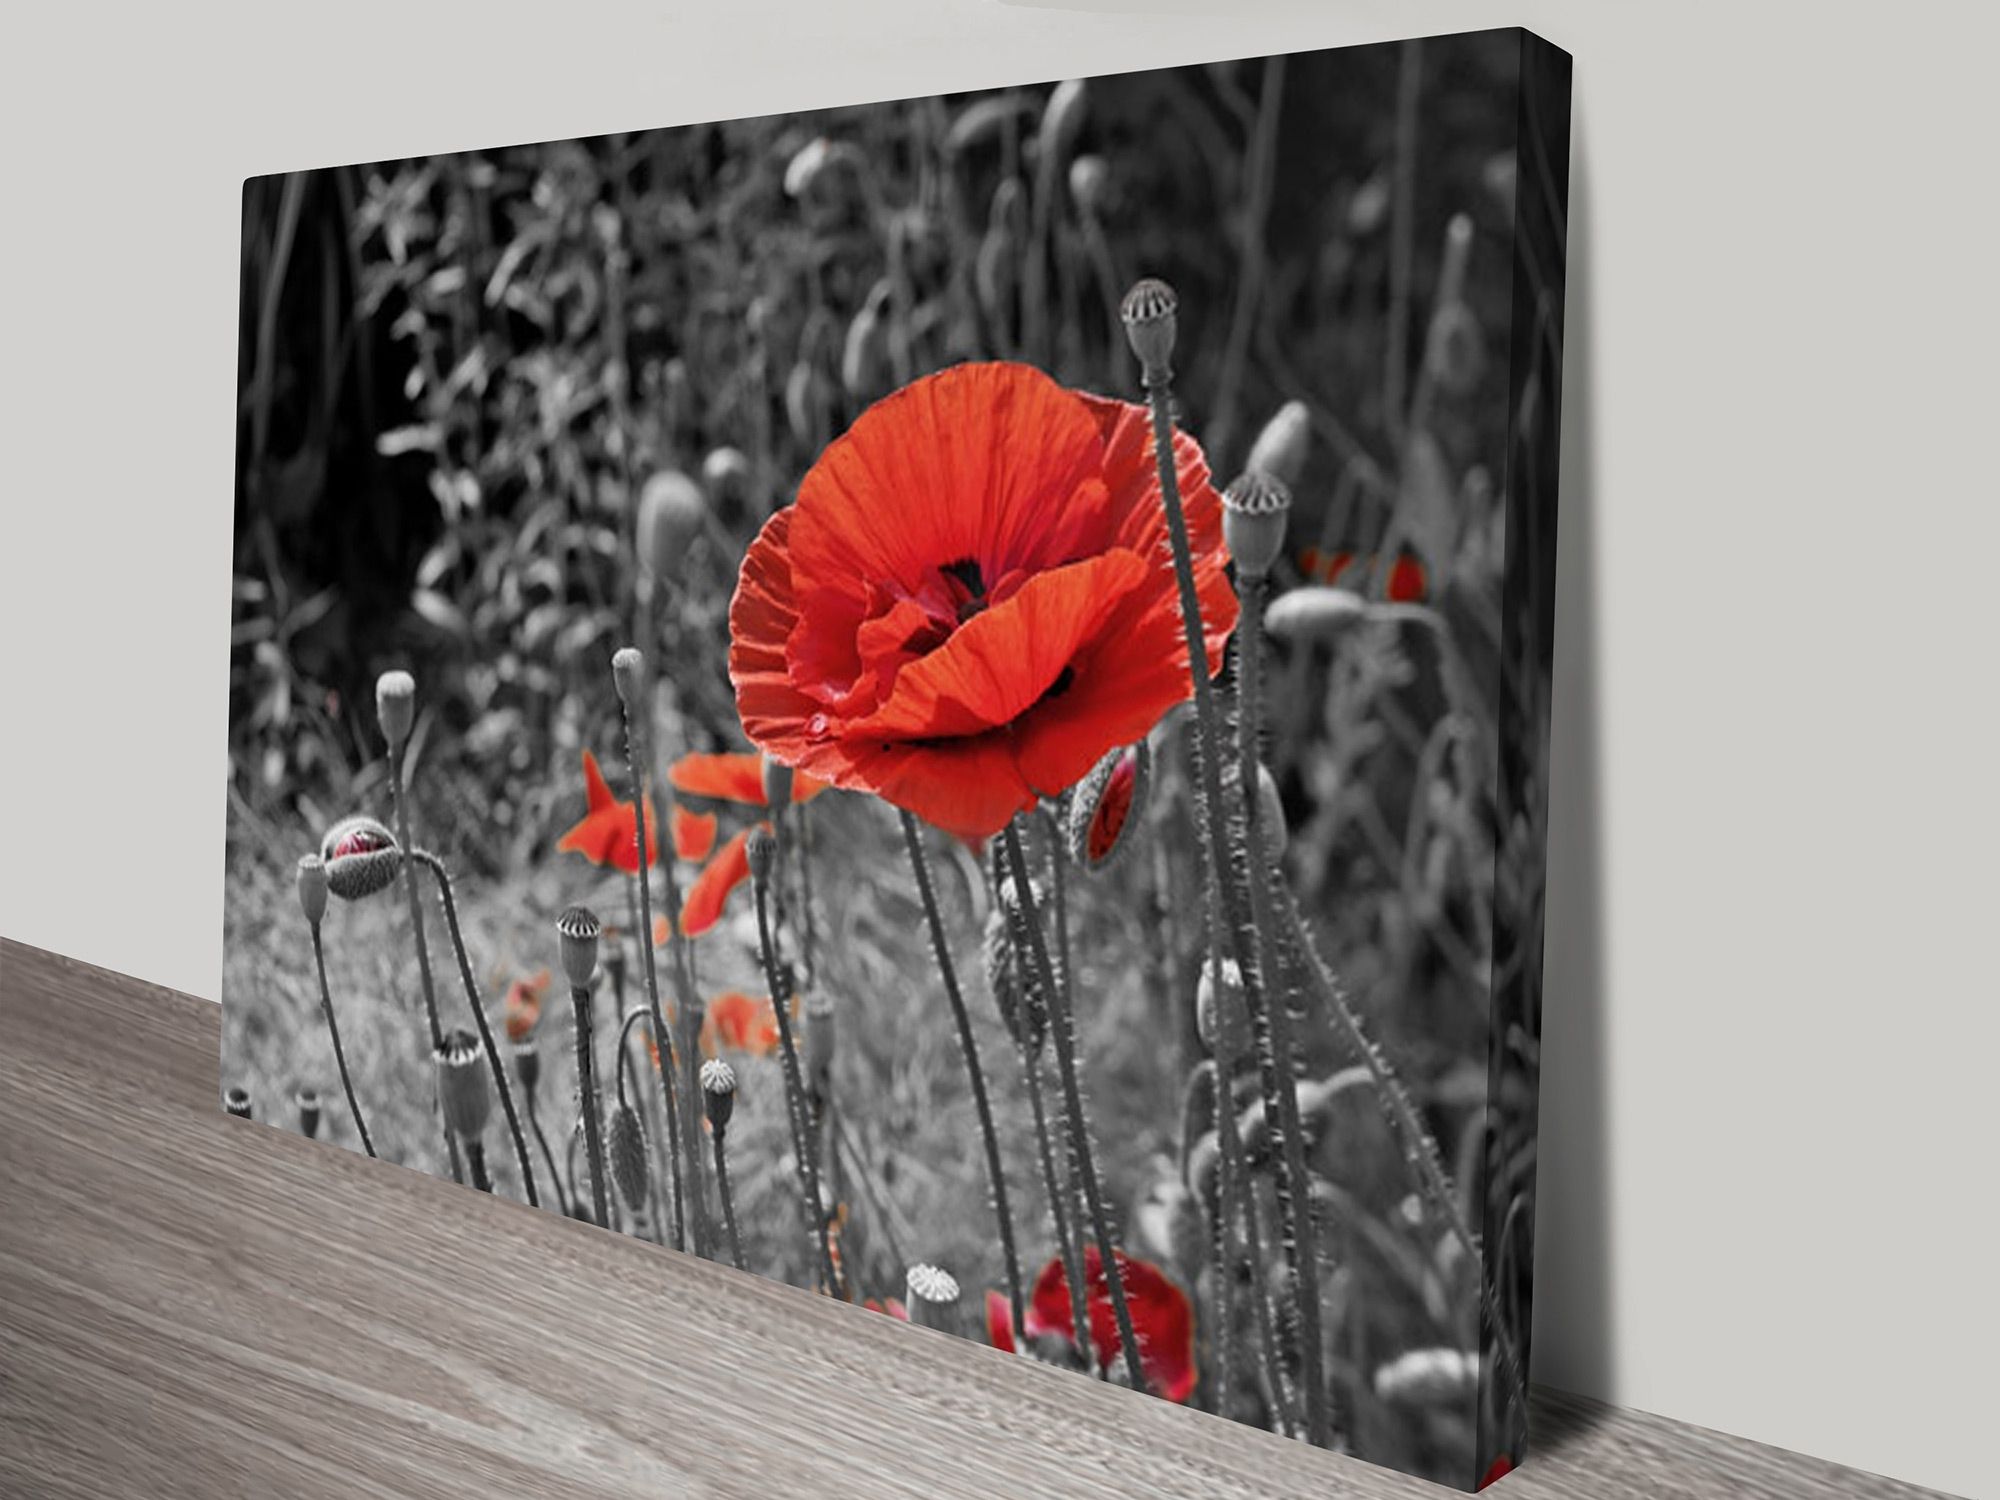 Colour Splash Canvas Prints Australia Intended For Recent Canvas Wall Art In Australia (View 6 of 15)